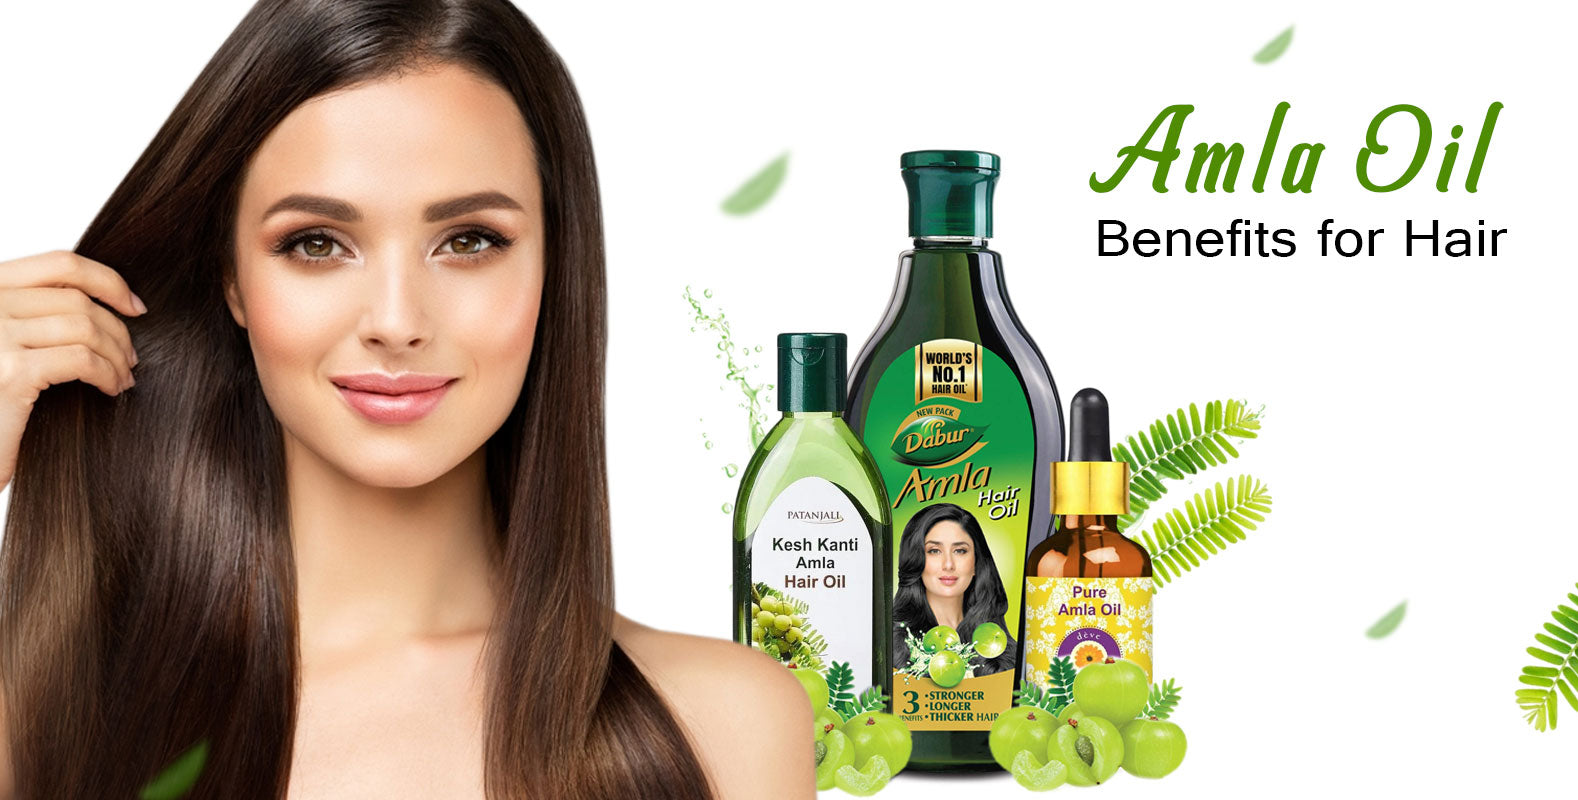 Amla Oil strengthens hair, reduce premature pigment loss from hair